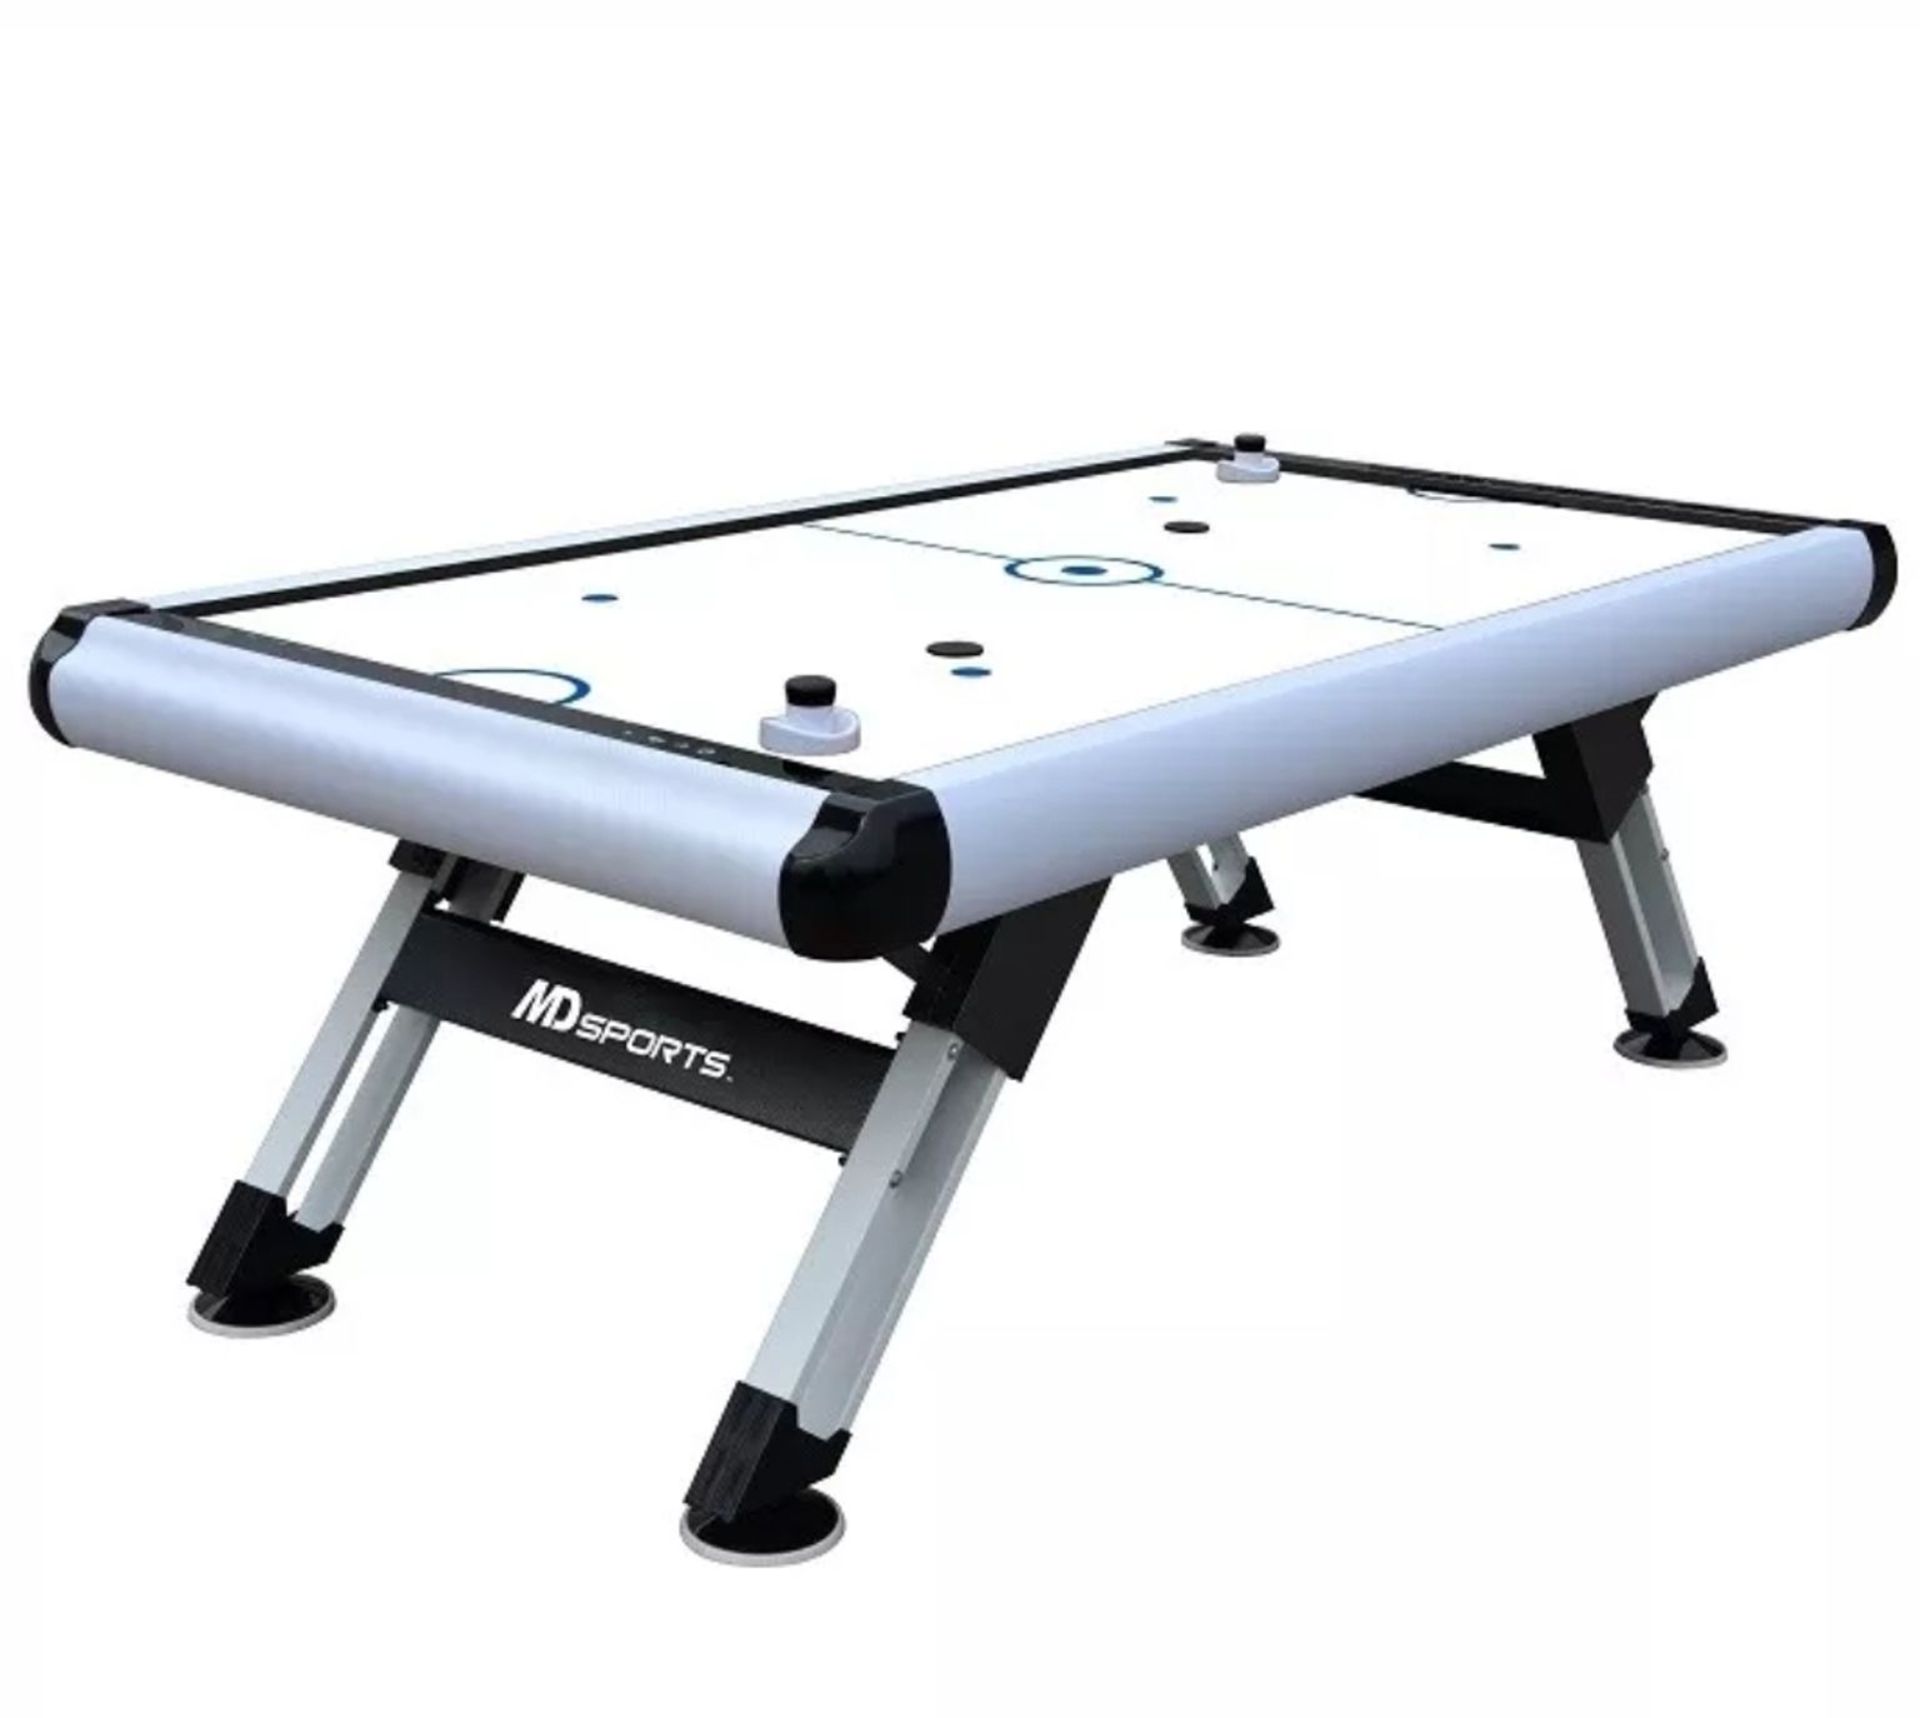 1 MEDAL SPORTS 7FT 5" AIR HOCKEY TABLE RRP Â£299 (GENERIC IMAGE GUIDE)